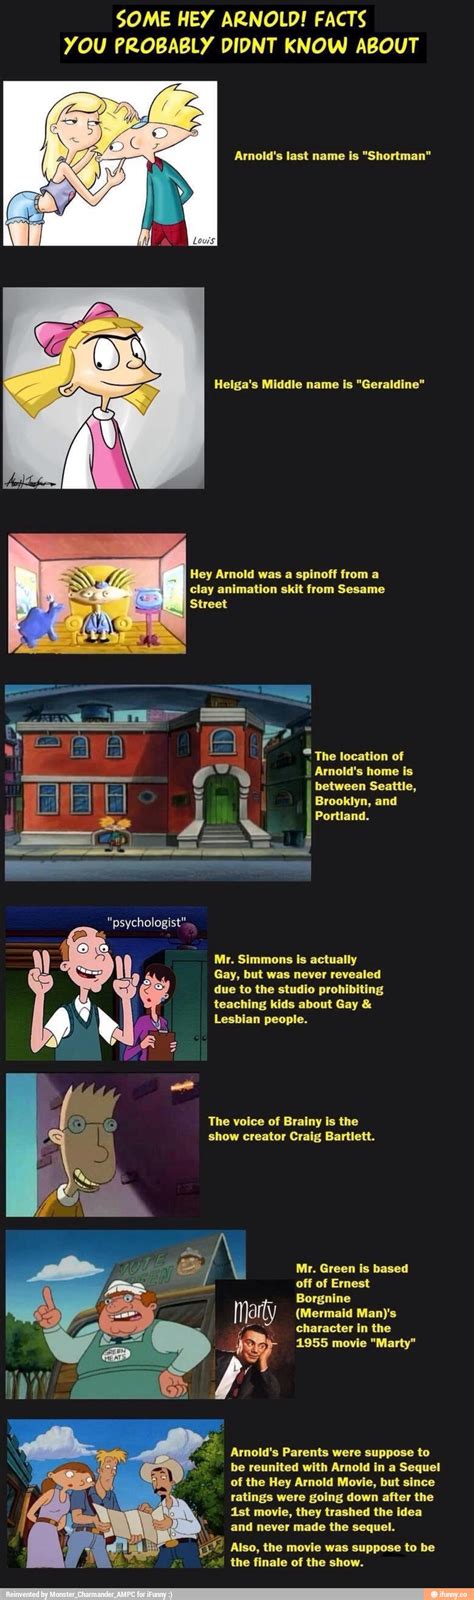 Some Hey Arnold Facts You Probably Didnt Know About